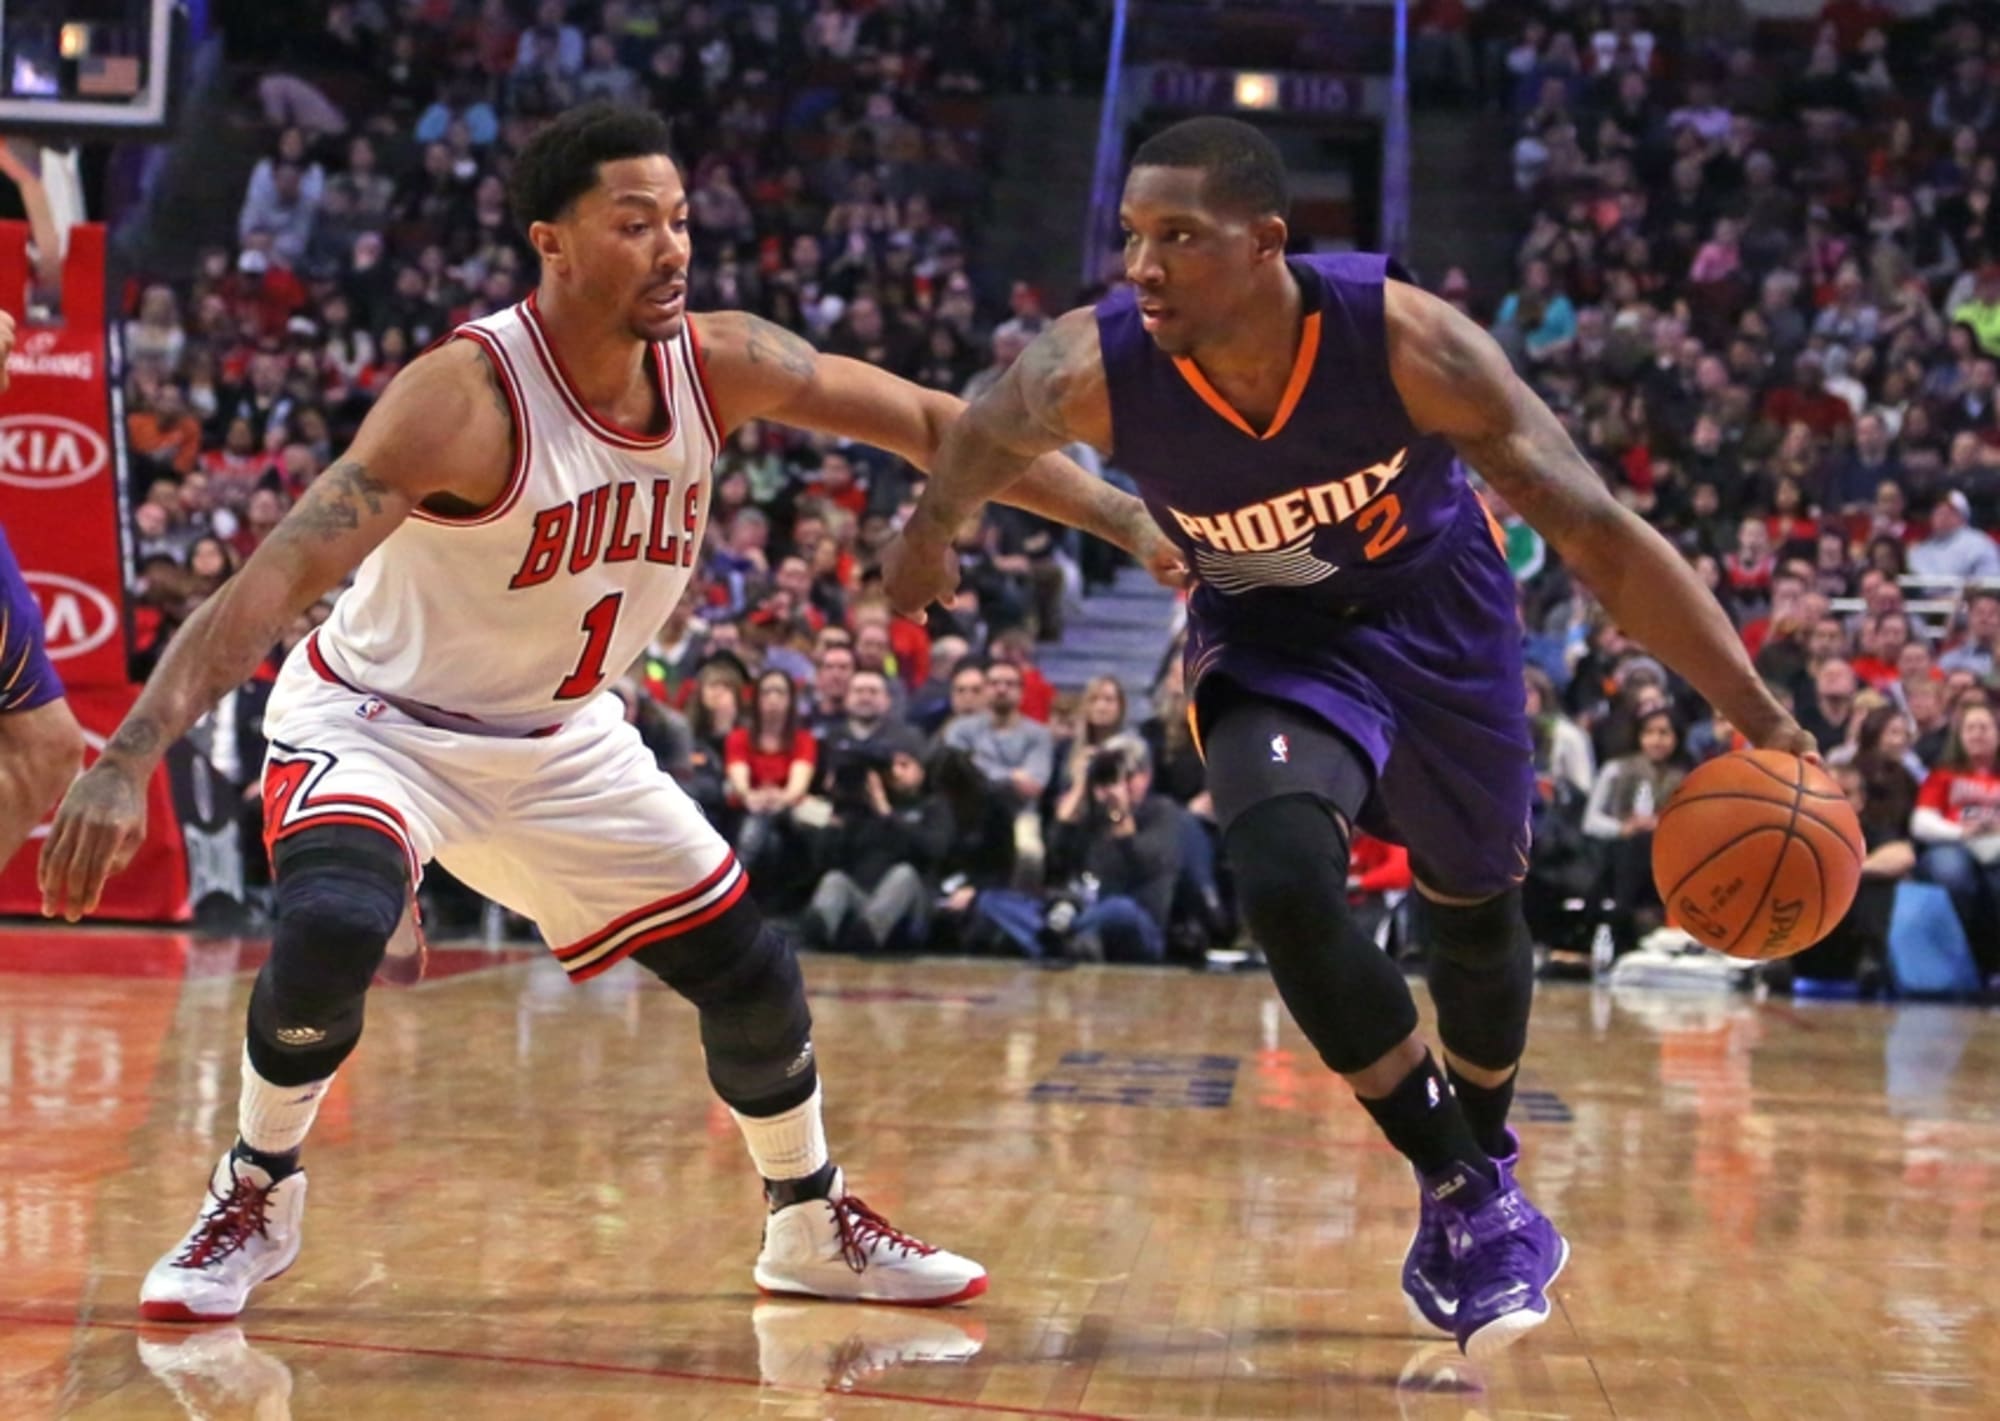 Players Faked Injuries to Avoid Playing Against Prime D-Rose, Per